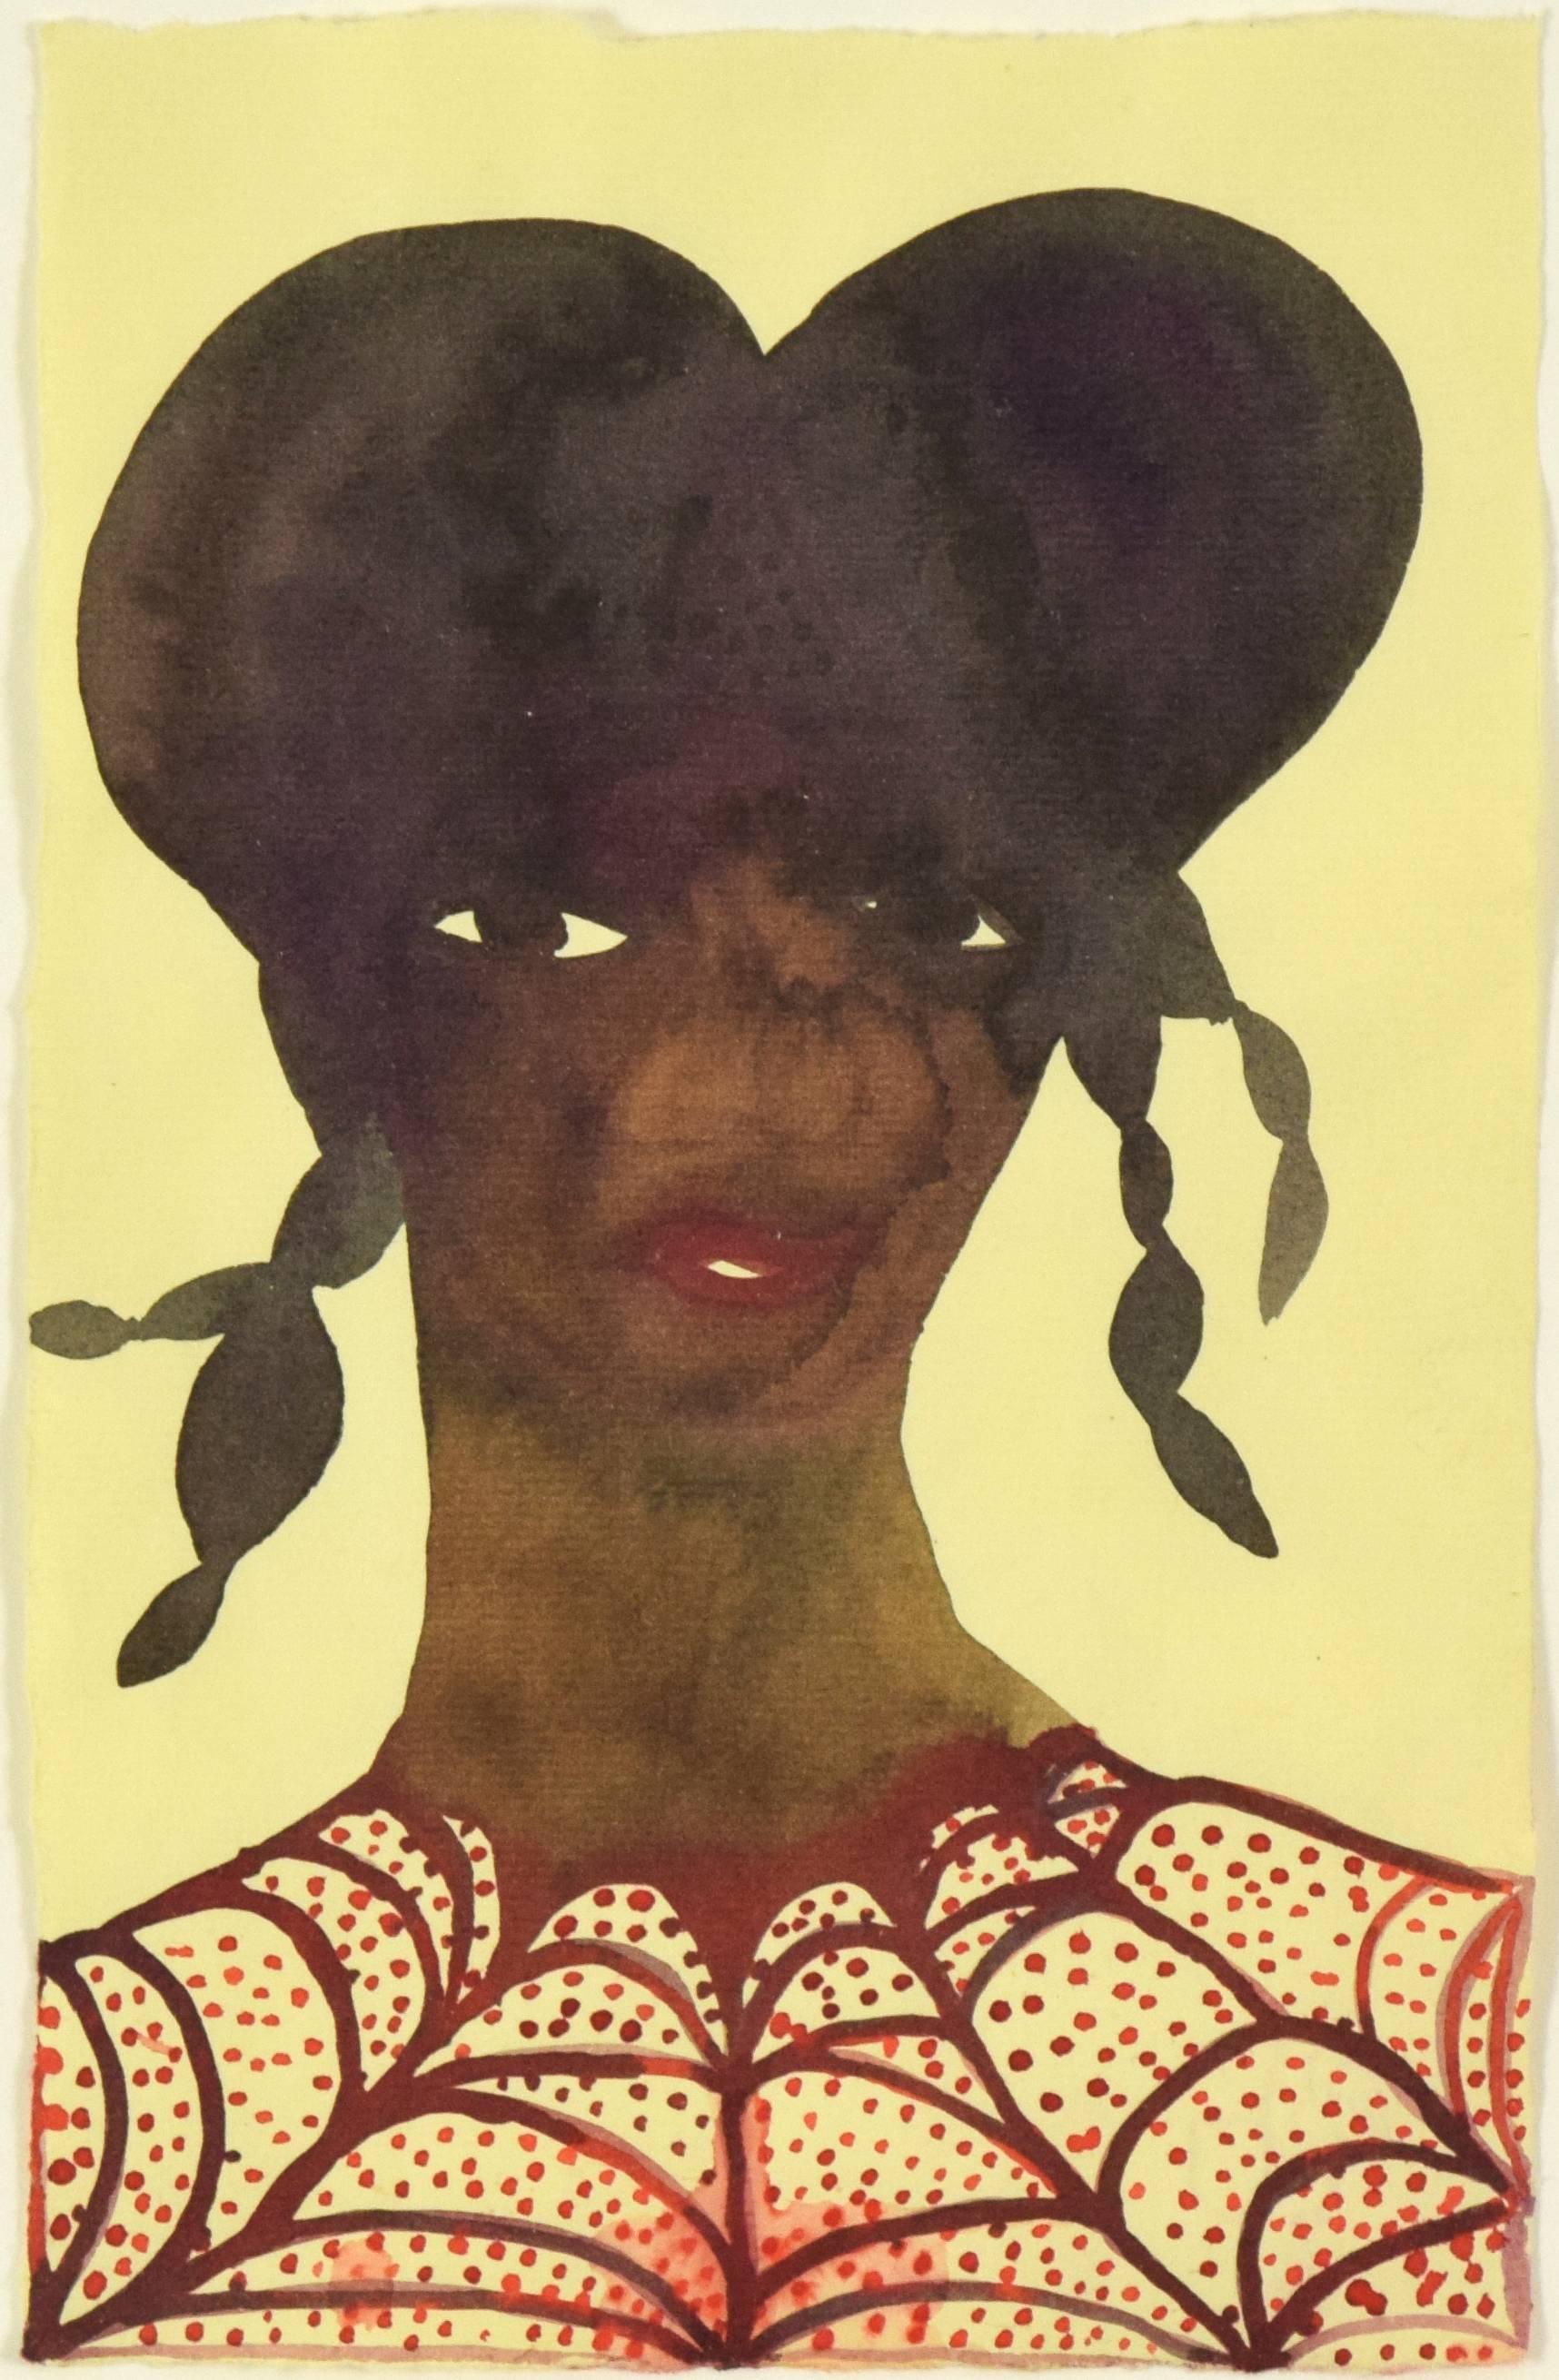 Chris Ofili Portrait Painting - Untitled, Red Dots, 1997 